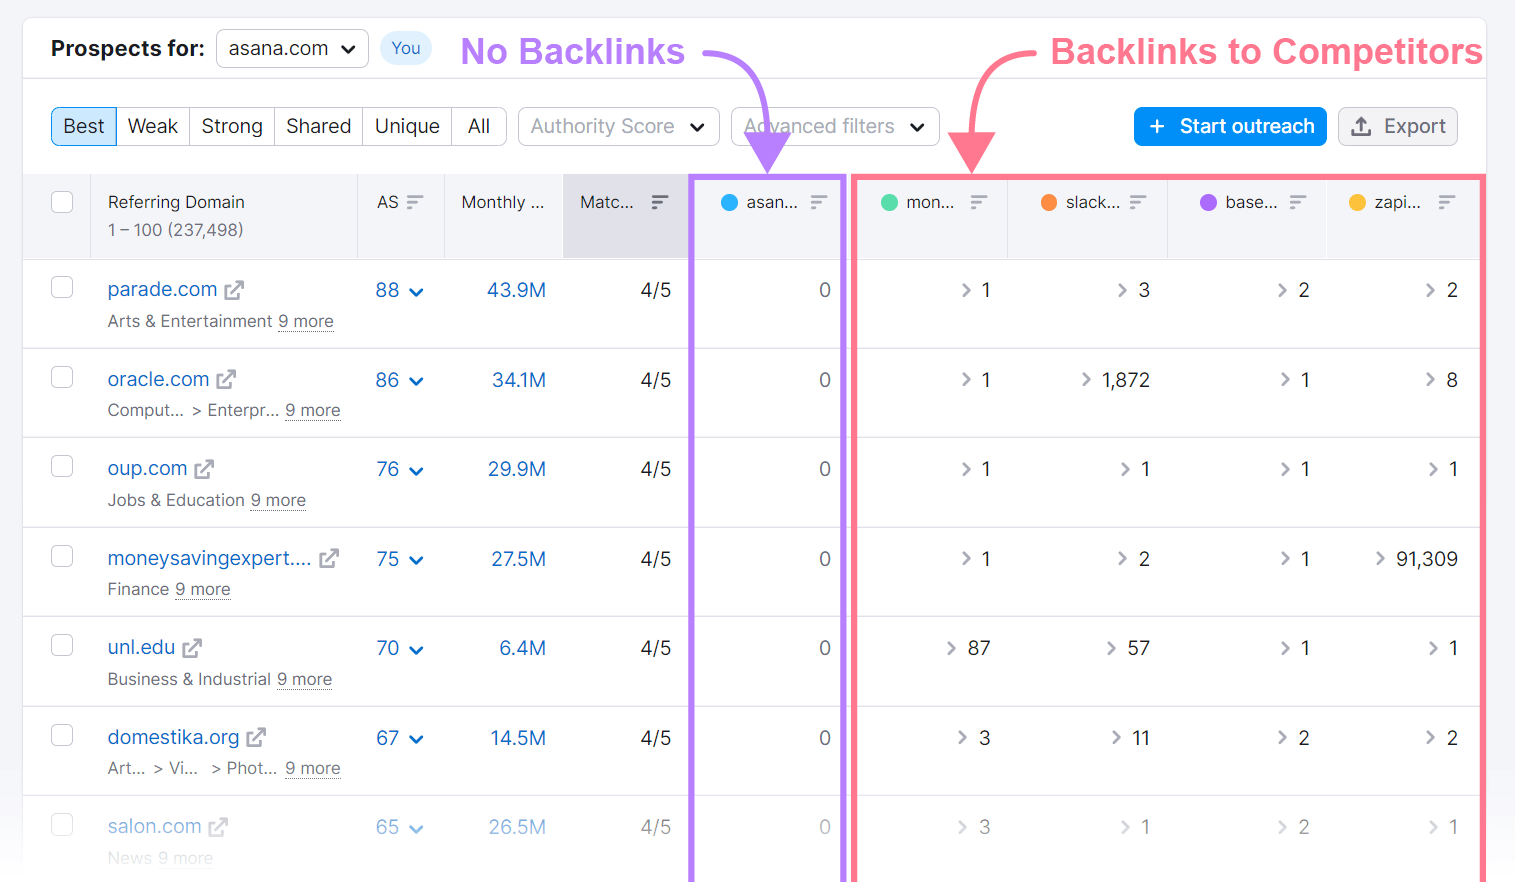 Backlink Gap prospects table, with the ones with no backlinks and backlinks to competitors highlighted